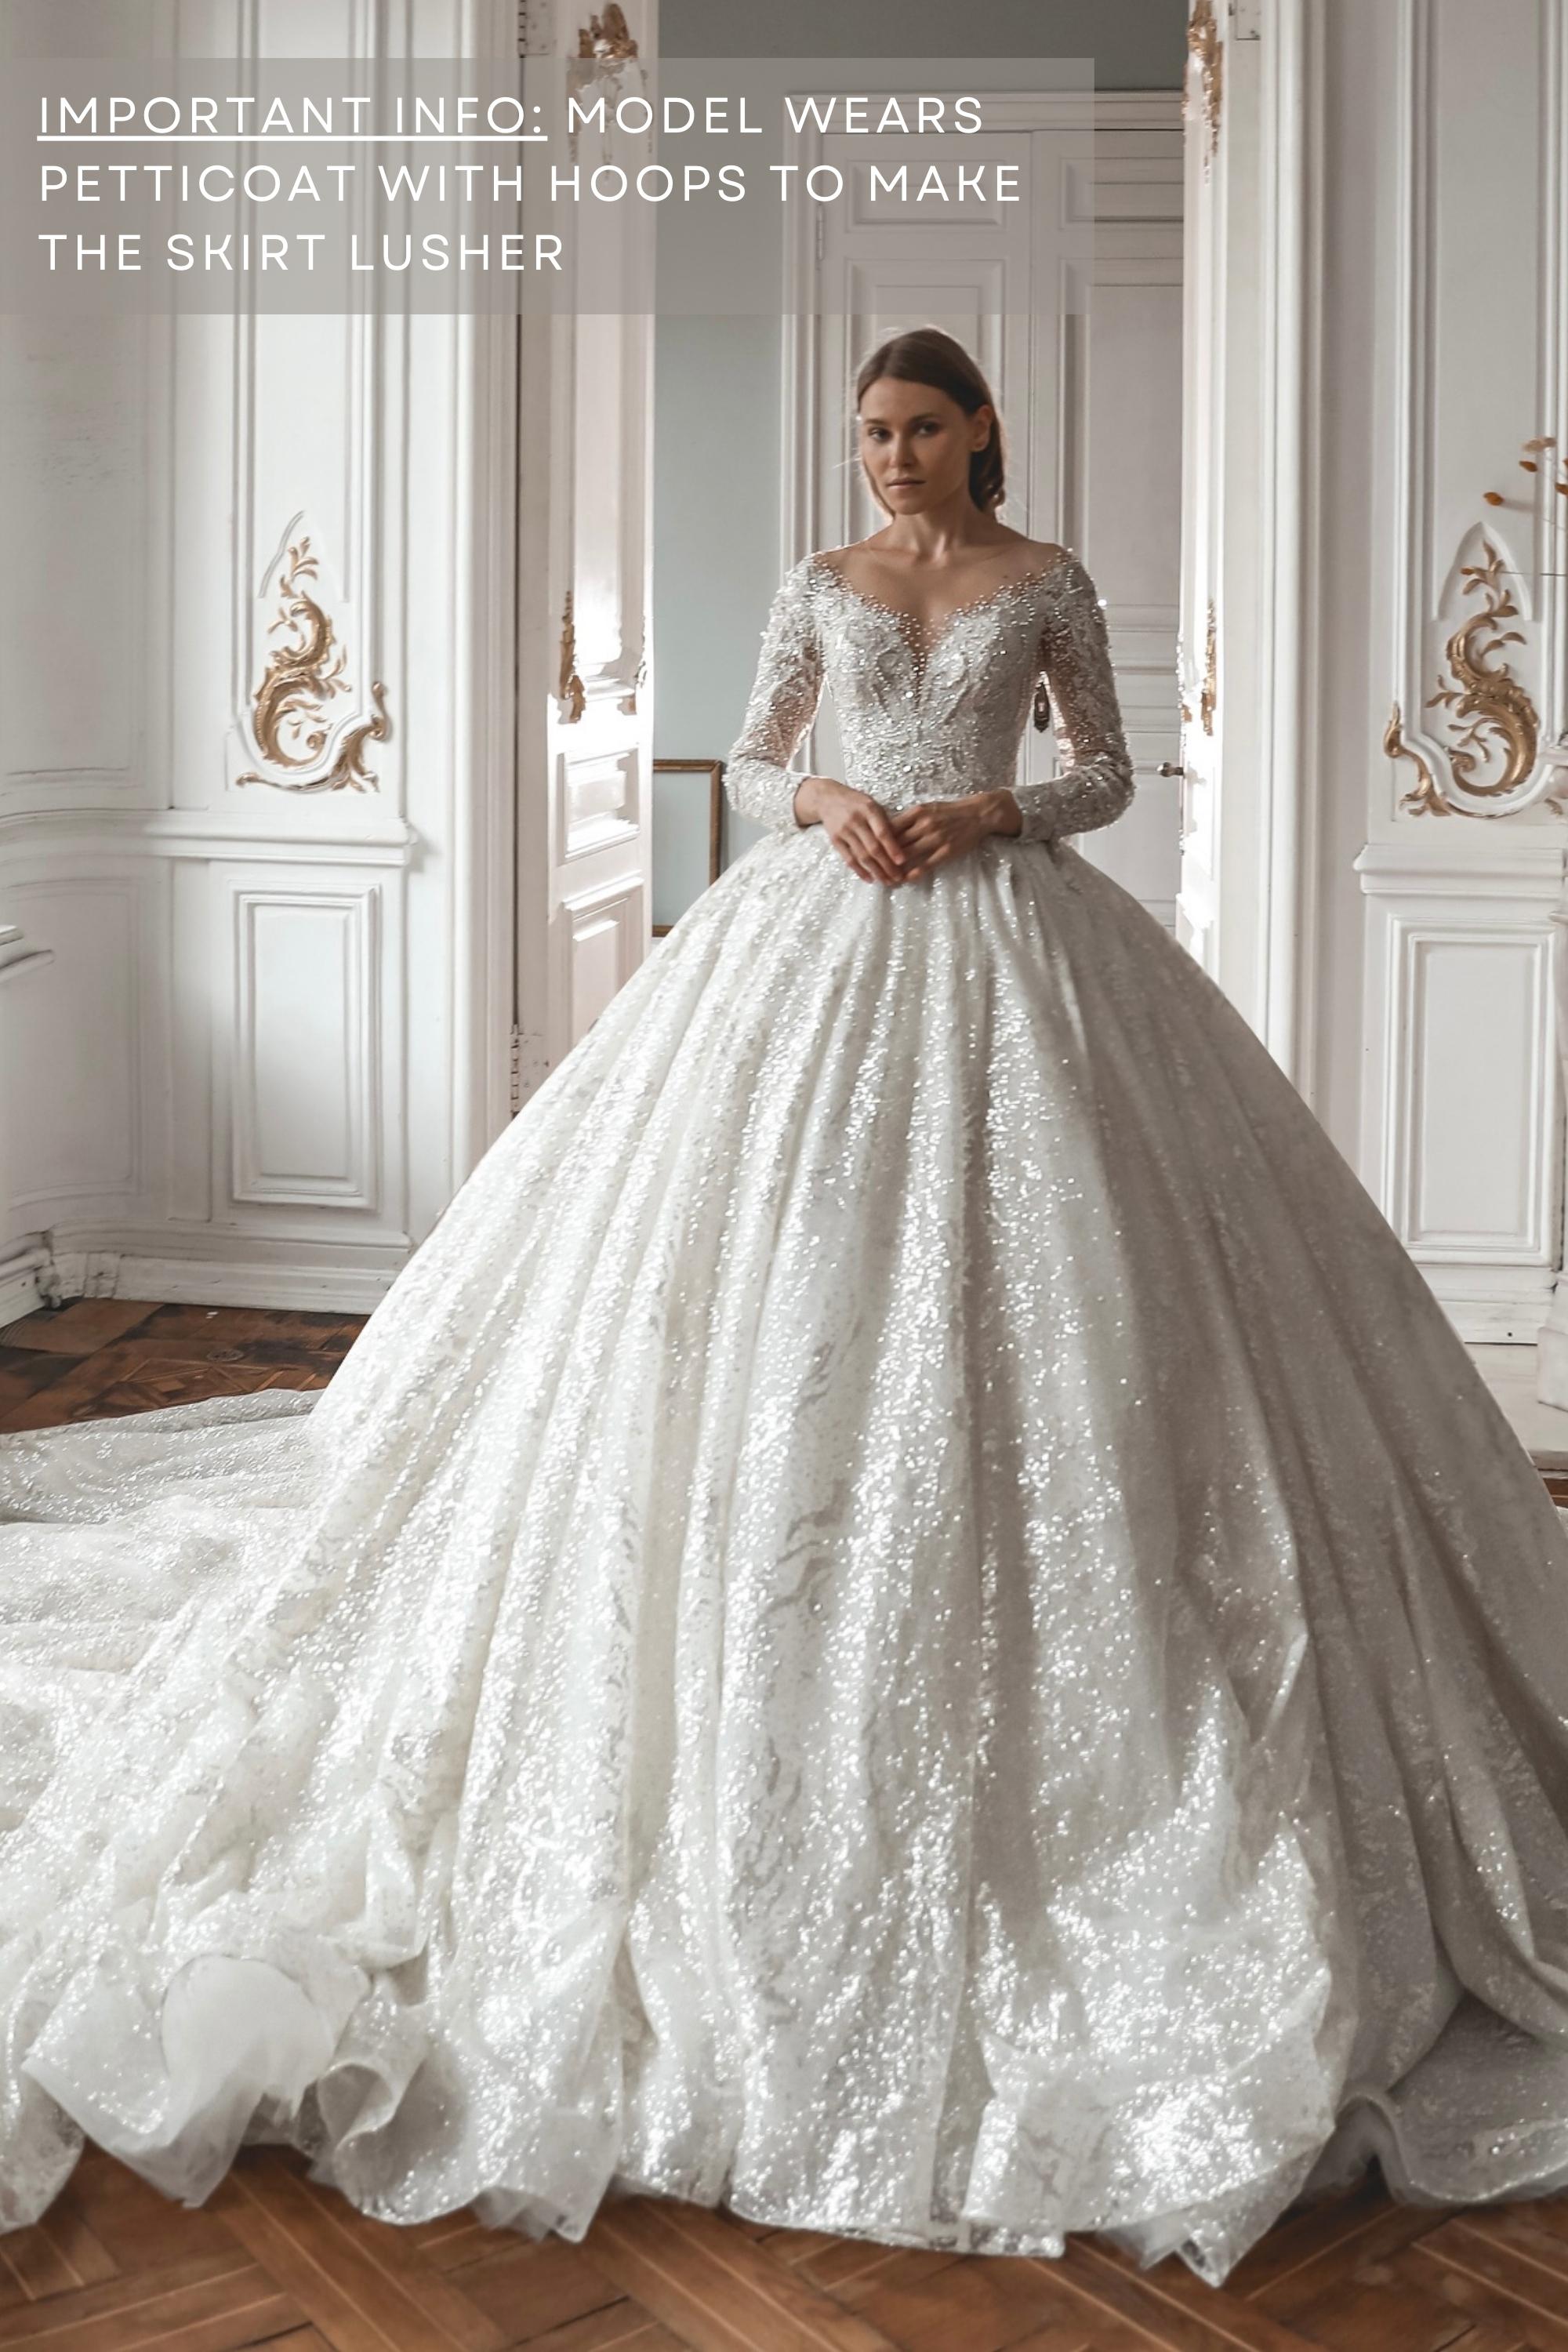 Five Things to Know Before Buying a Custom Wedding Dress